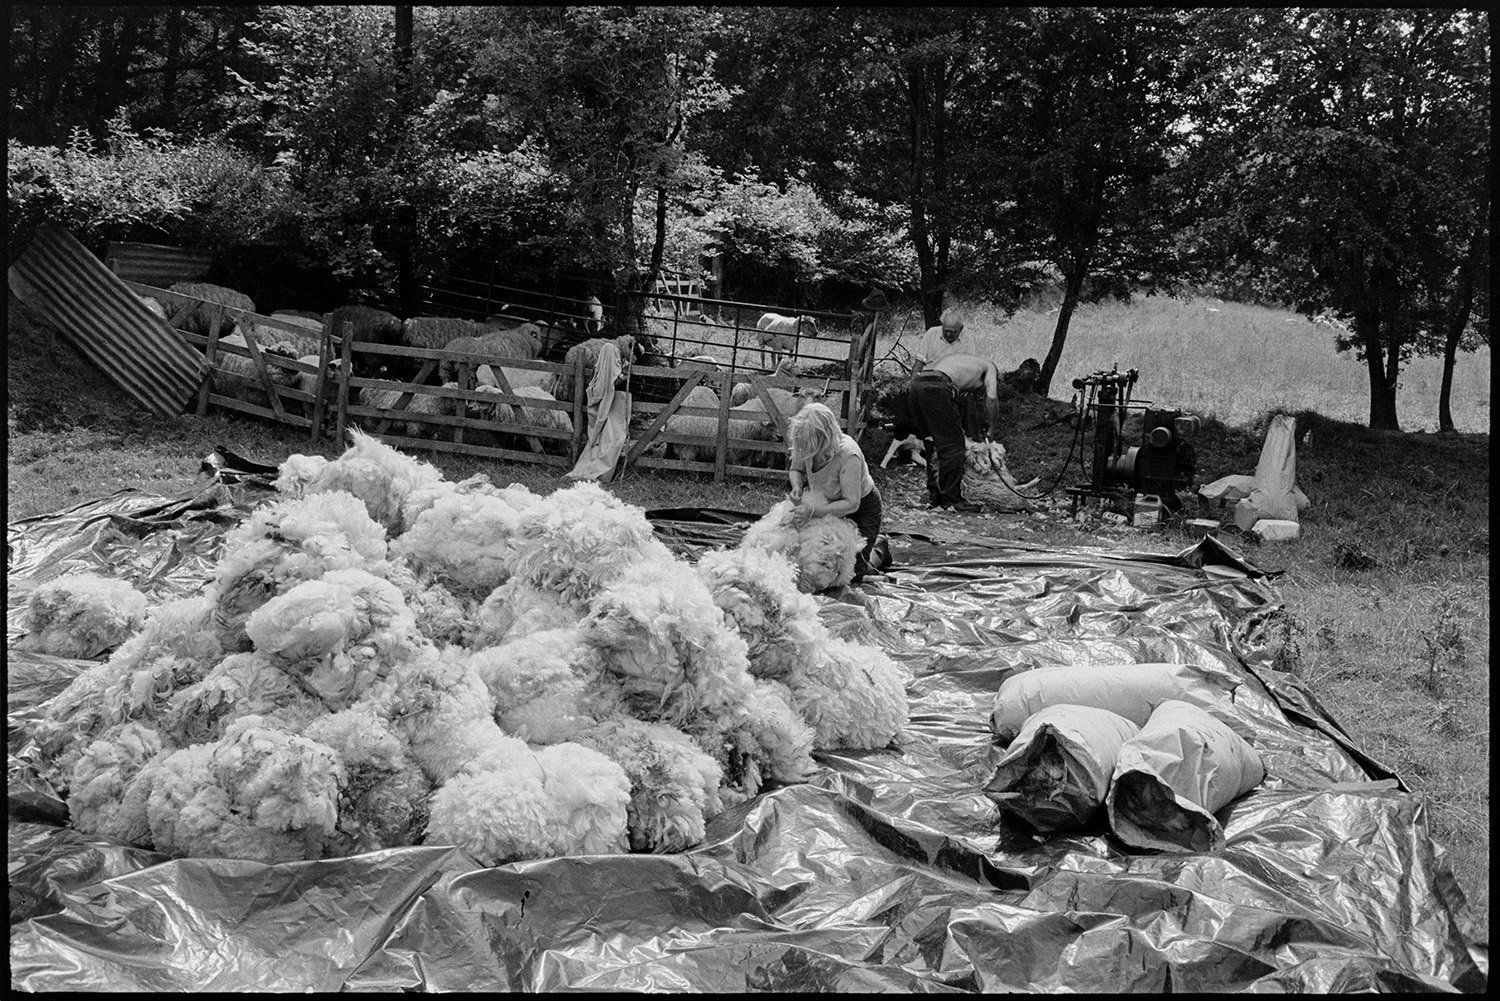 Shearing sheep, farmer seated with dog, fleeces piled up in sun. 
[Jo Curzon bundling and tying sheep fleeces on a large tarpaulin in a field at Addisford, Dolton. A man is shearing a sheep in the background, using a shearing machine. Archie Parkhouse is sat behind him and other sheep are waiting to be shorn in a pen nearby.]